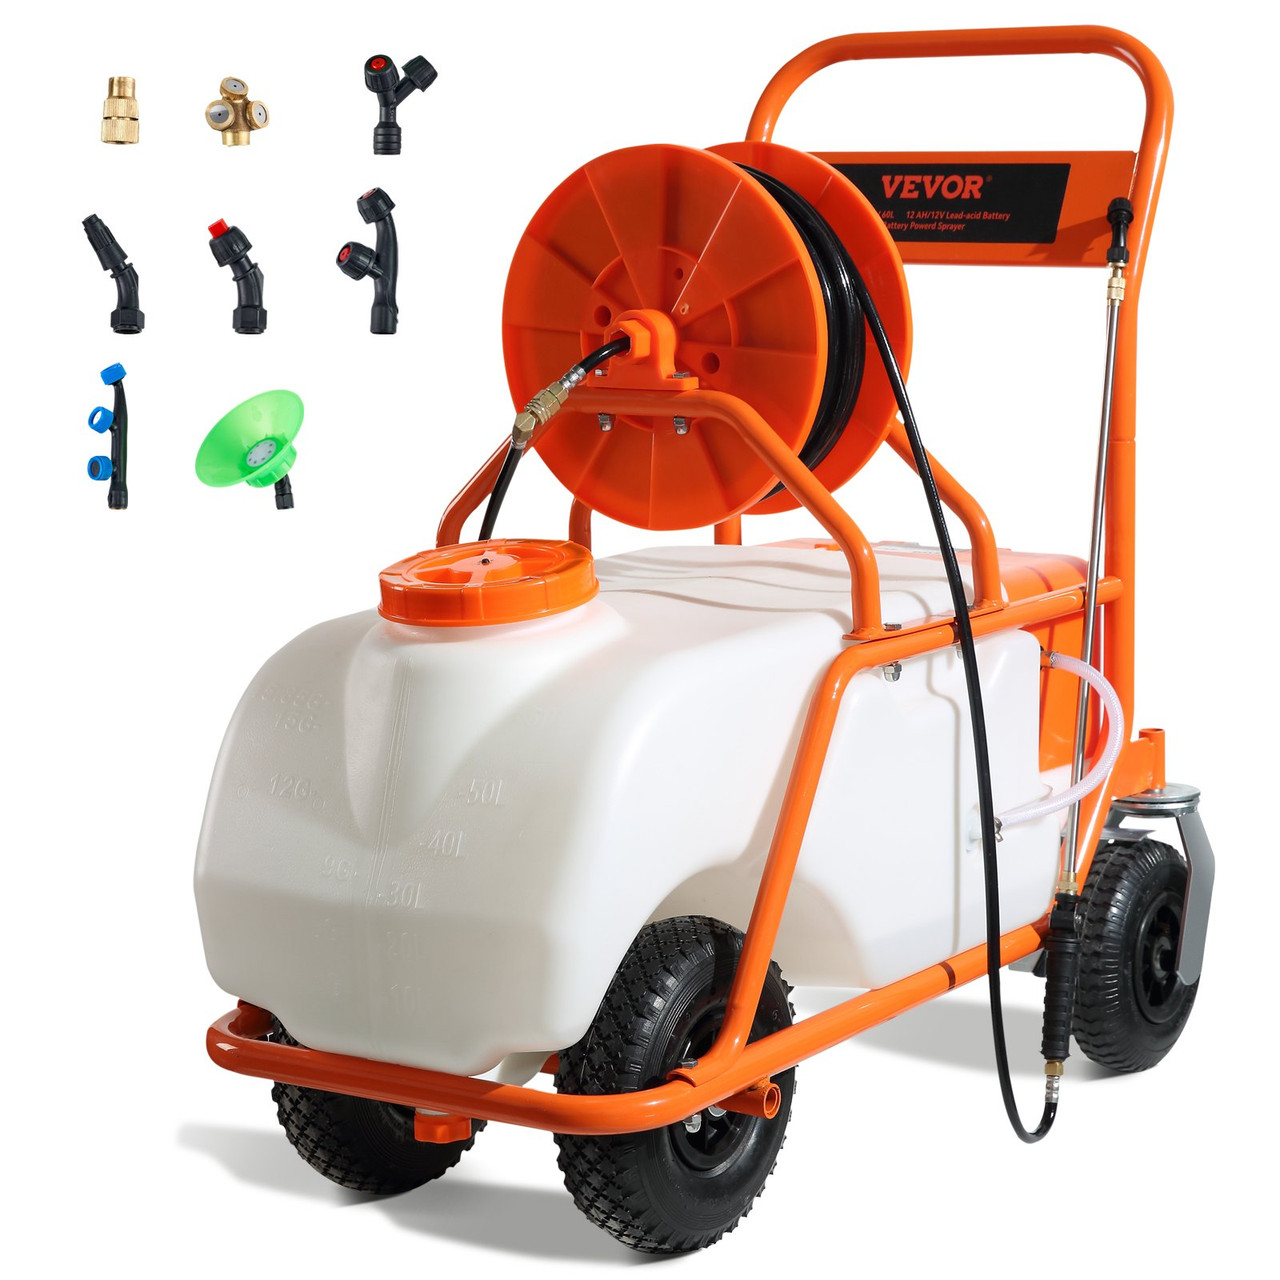 Battery Powered Lawn Sprayer on Wheel, 0-90 PSI Adjustable Pressure, 15 Gallon Tank, Cart Sprayer with 8 Nozzles and 2 Wands, 12V 12Ah Battery, Wide Mouth Lid for Weeding, Spraying